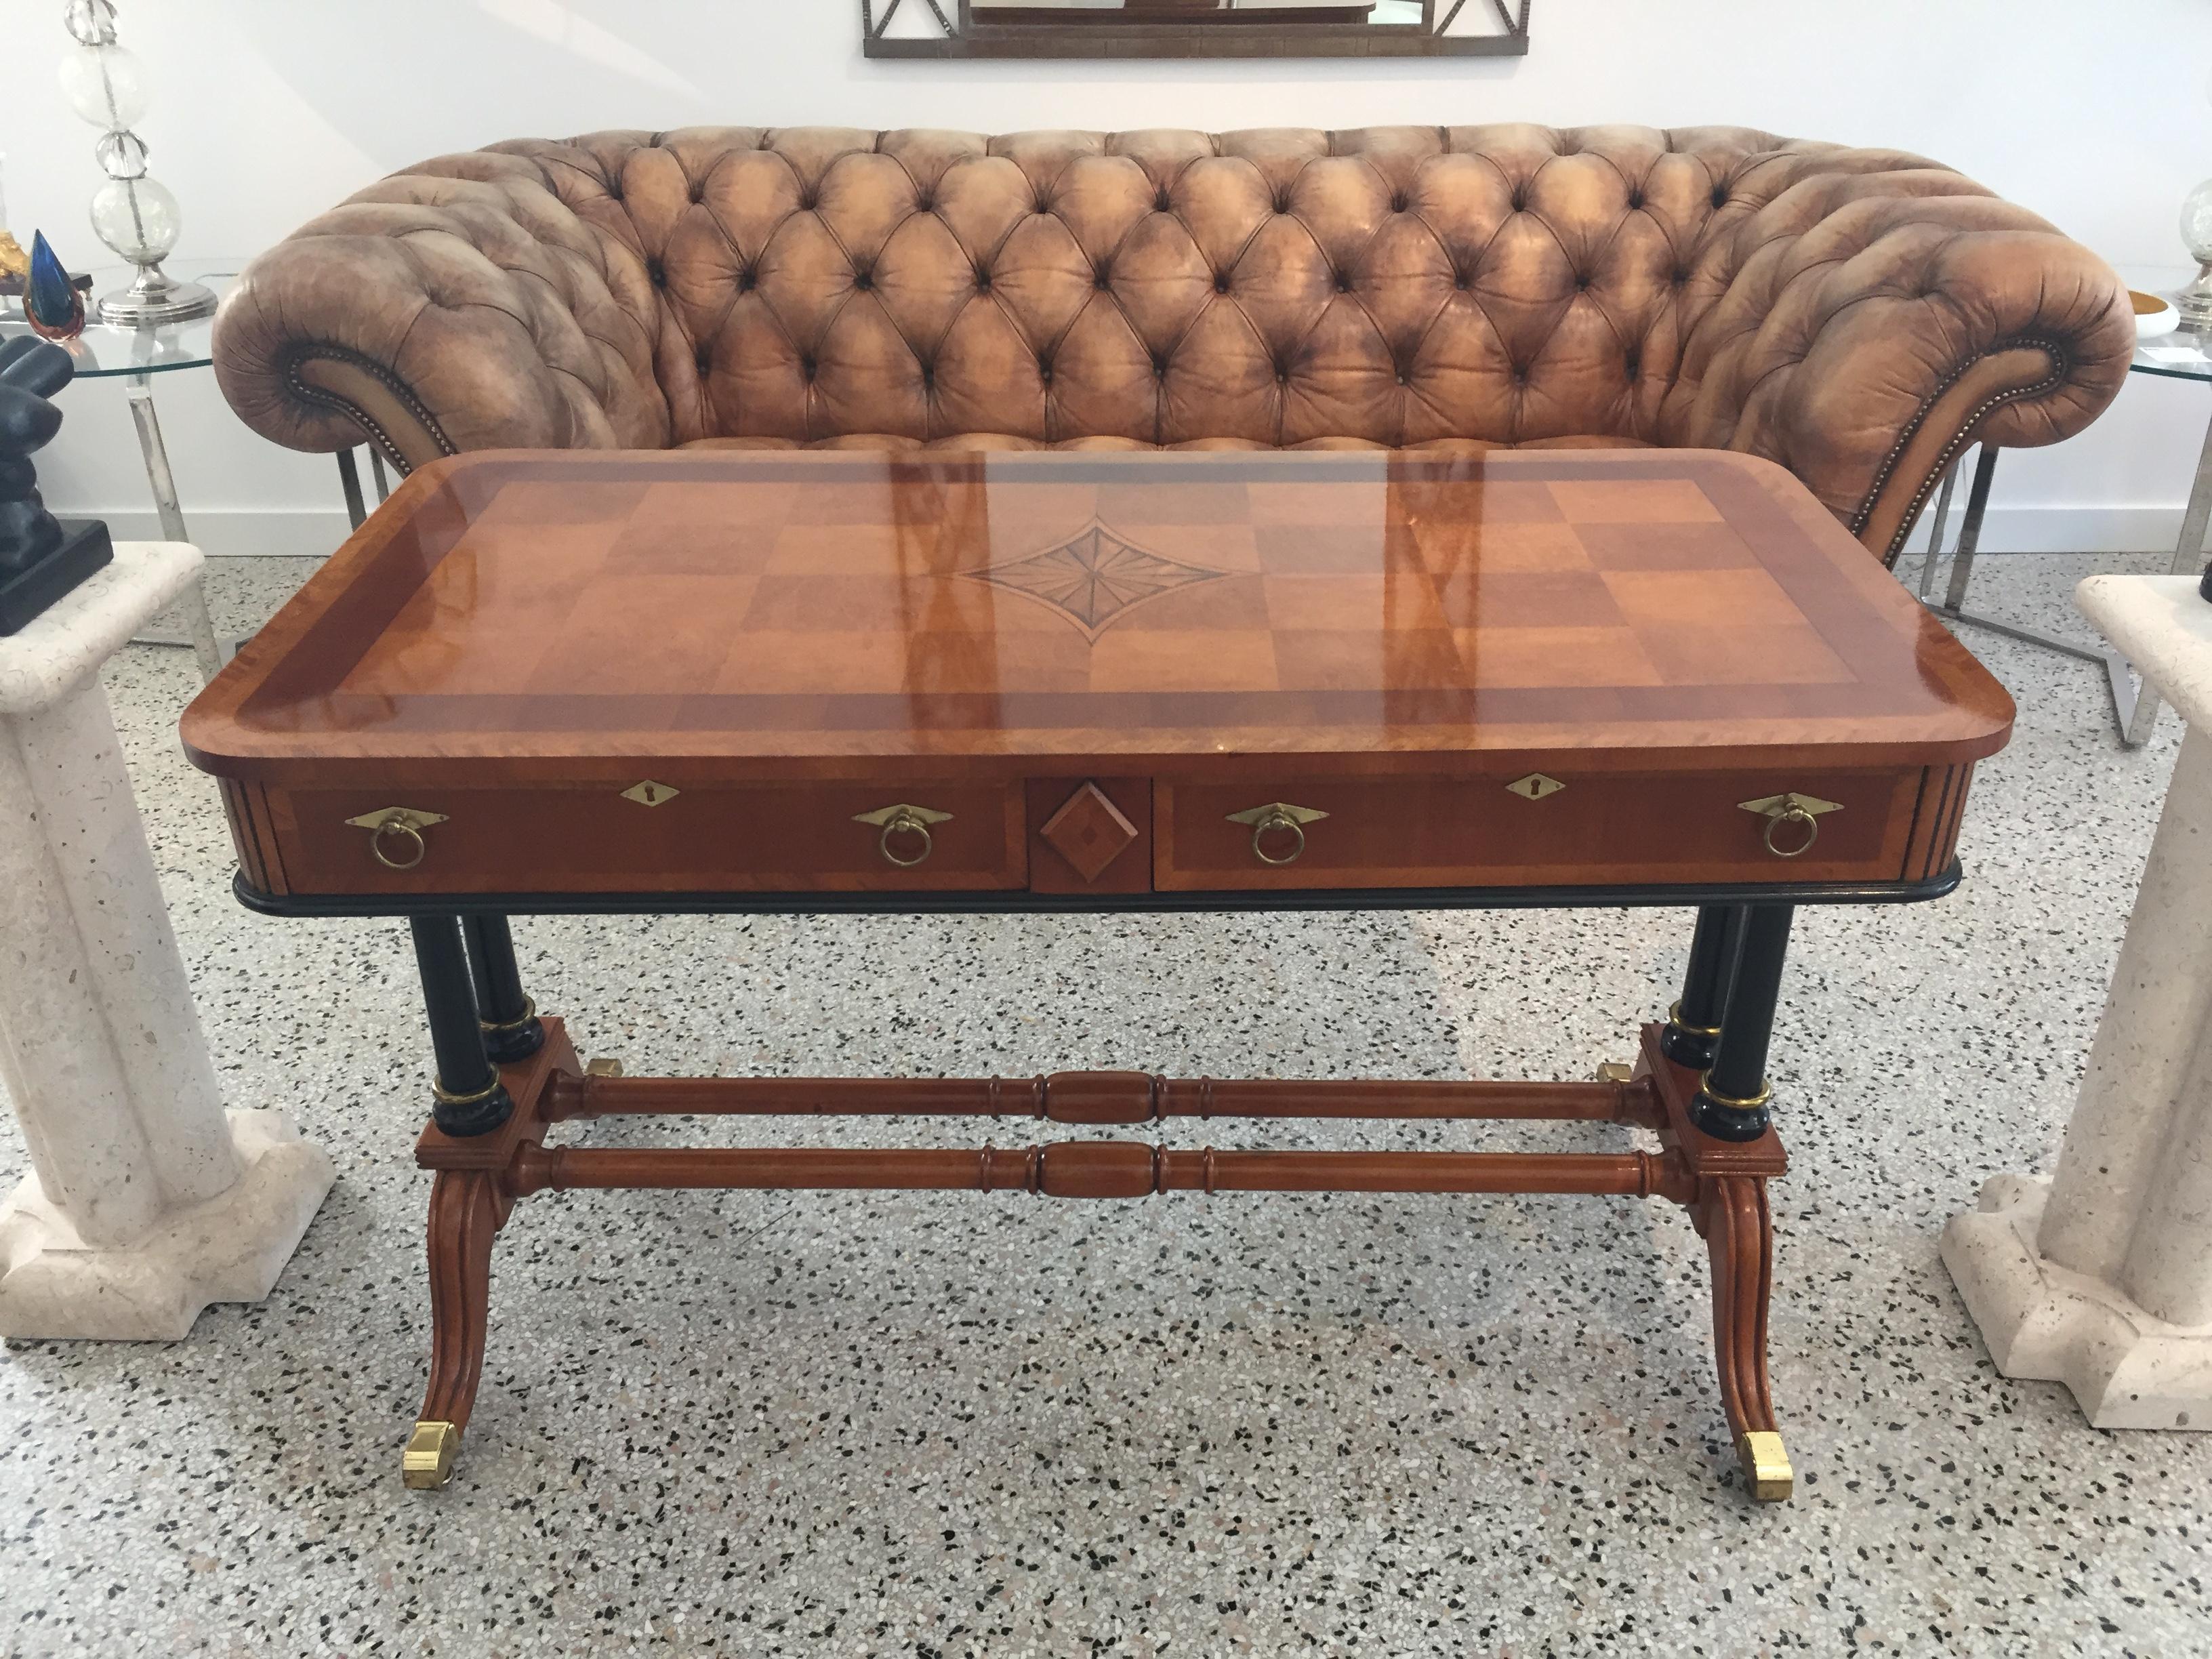 This stylish and chic Regency style console/library table dates to the 1980s and we belive was produced/sold by Heckman Furniture.  

Note: In the lead photo you will see to vertical shadows...those are reflections of a mirror on the wall behind the